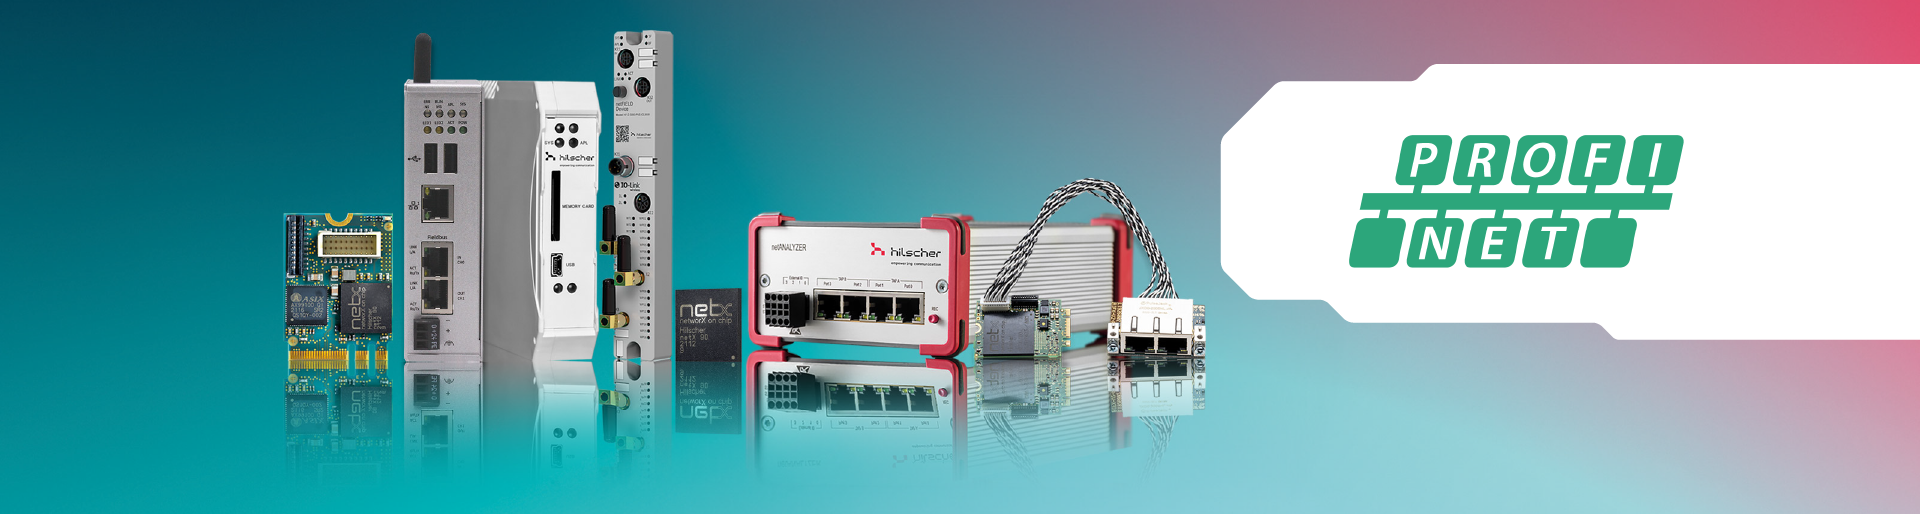 A line of 8 industrial communication products by Hilscher on a blue and red background. On a white area on the right side, there is a PROFINET logo in green.